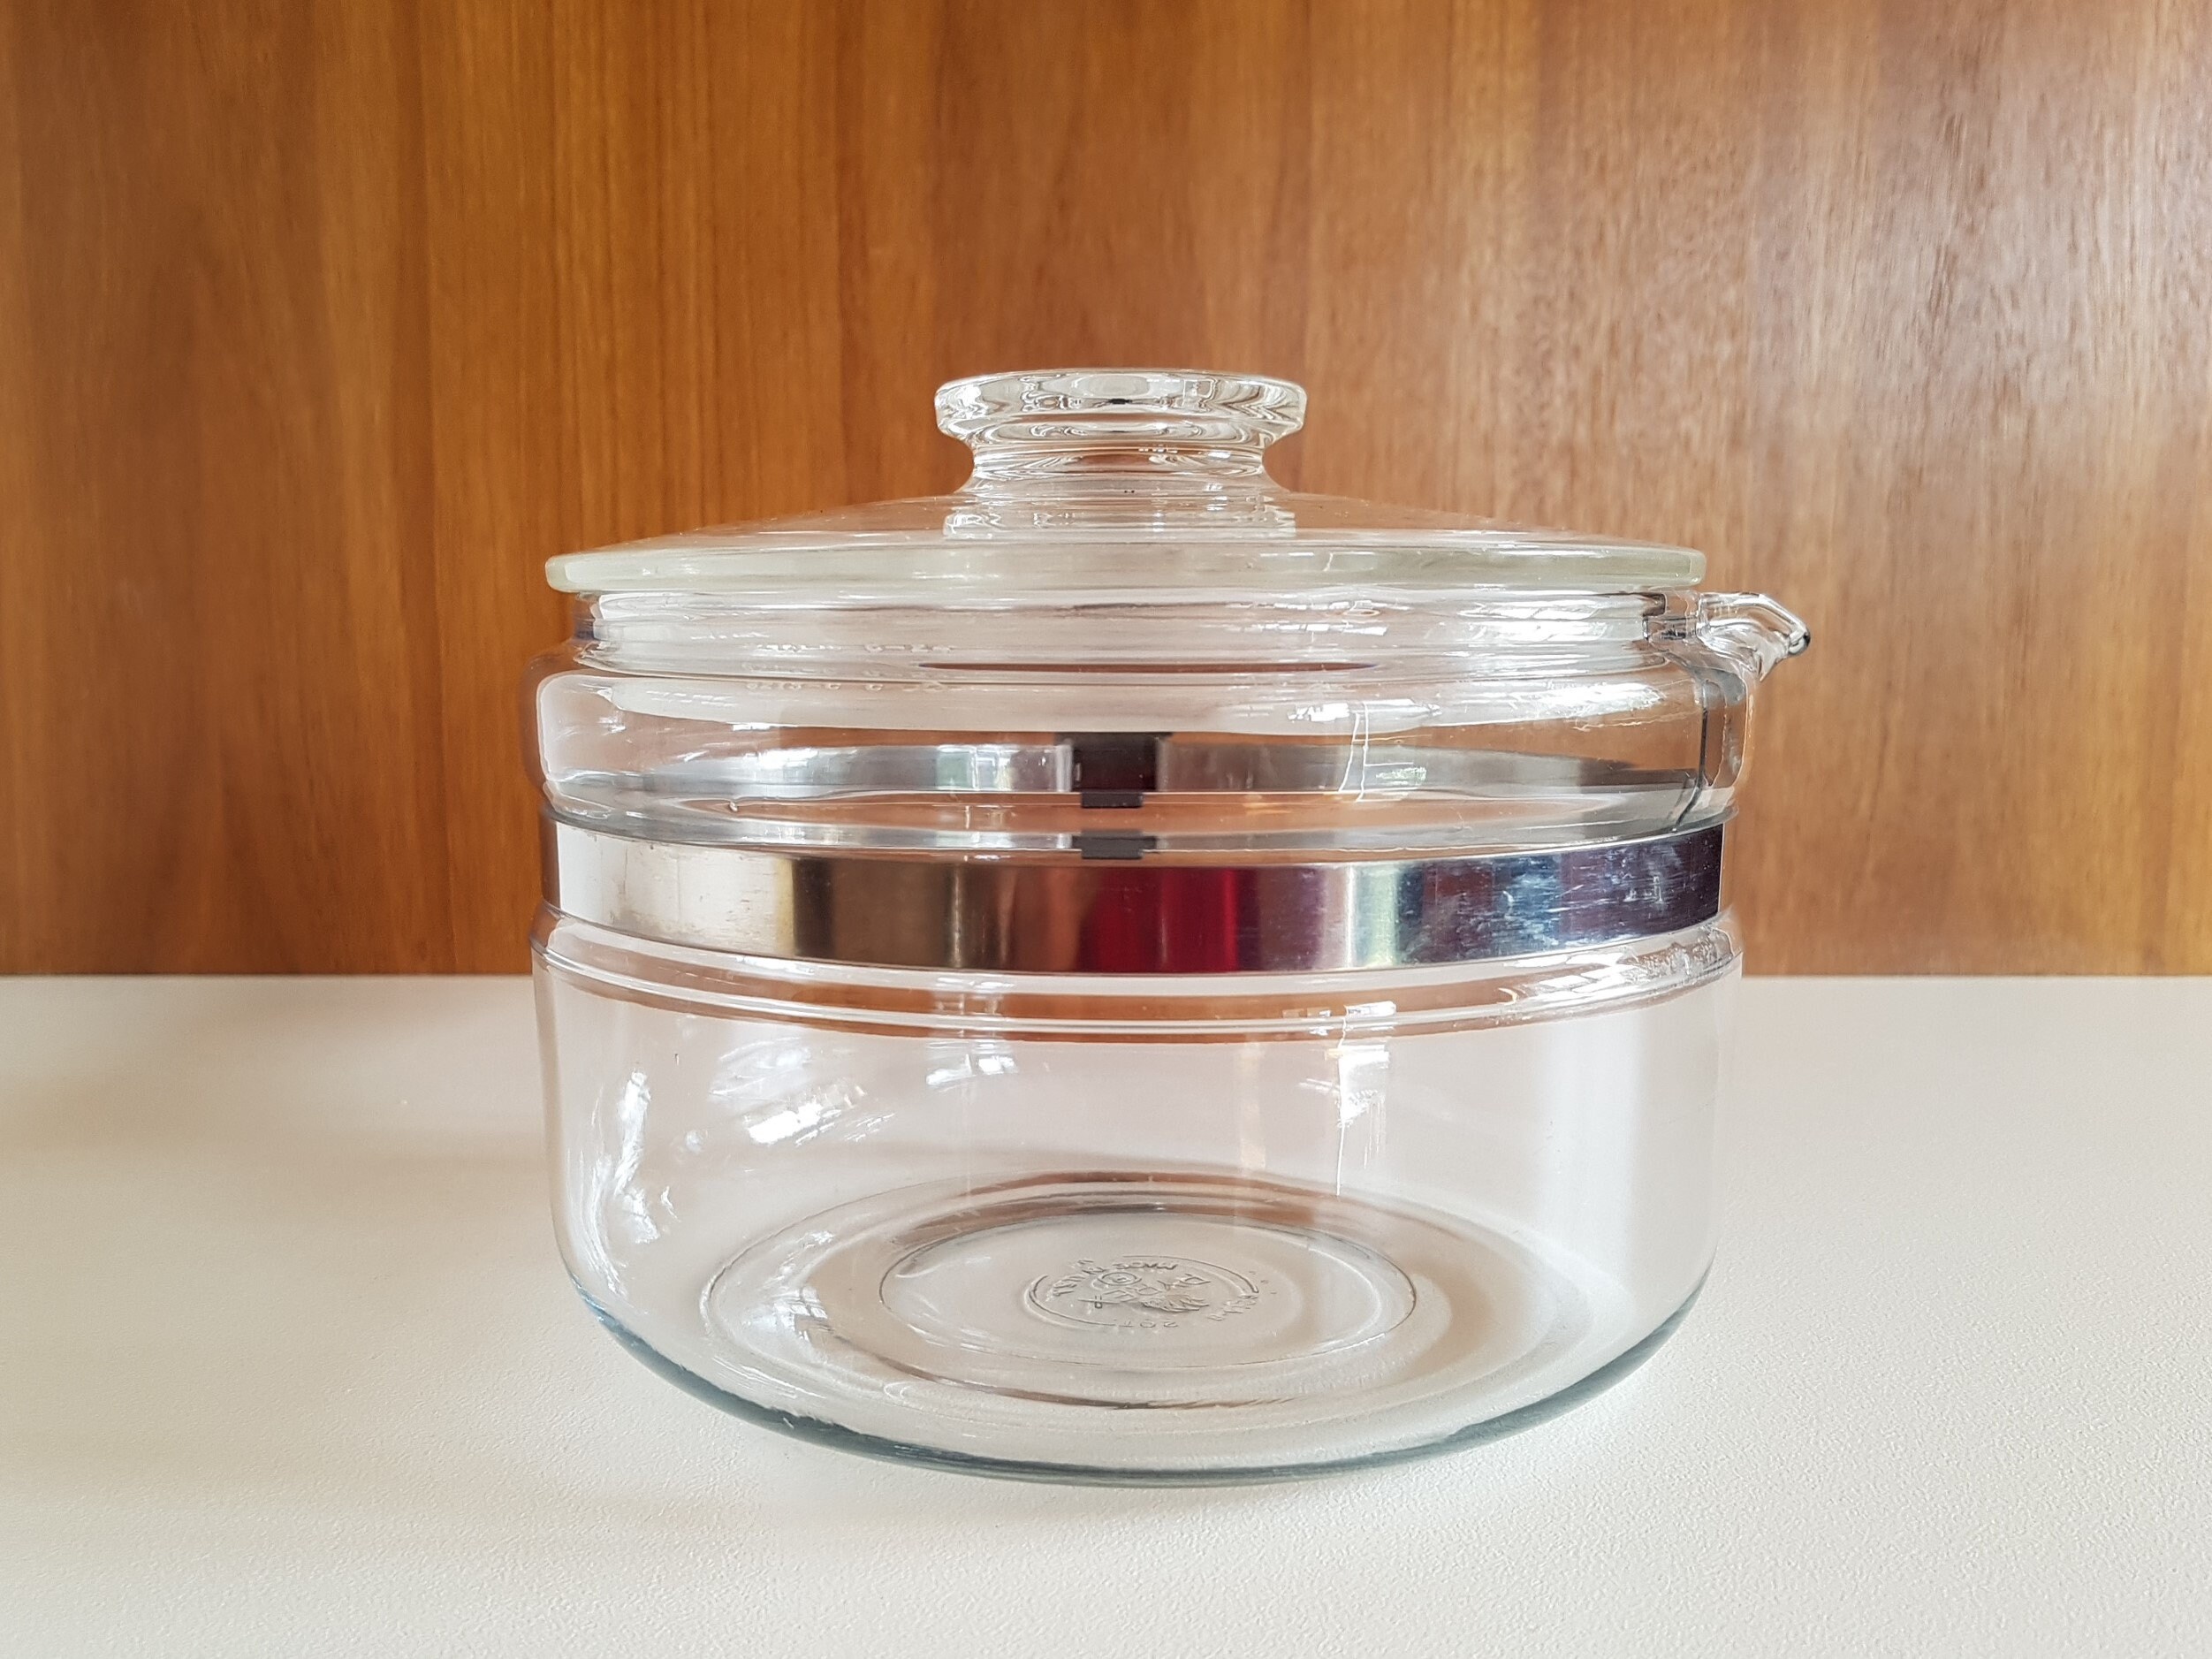 PYREX Flameware Clear Glass Saucepan Pot 6324-b 2 QT With Spout, Lid,  Handle and a Stainless Stell Band Made in USA 1950s 